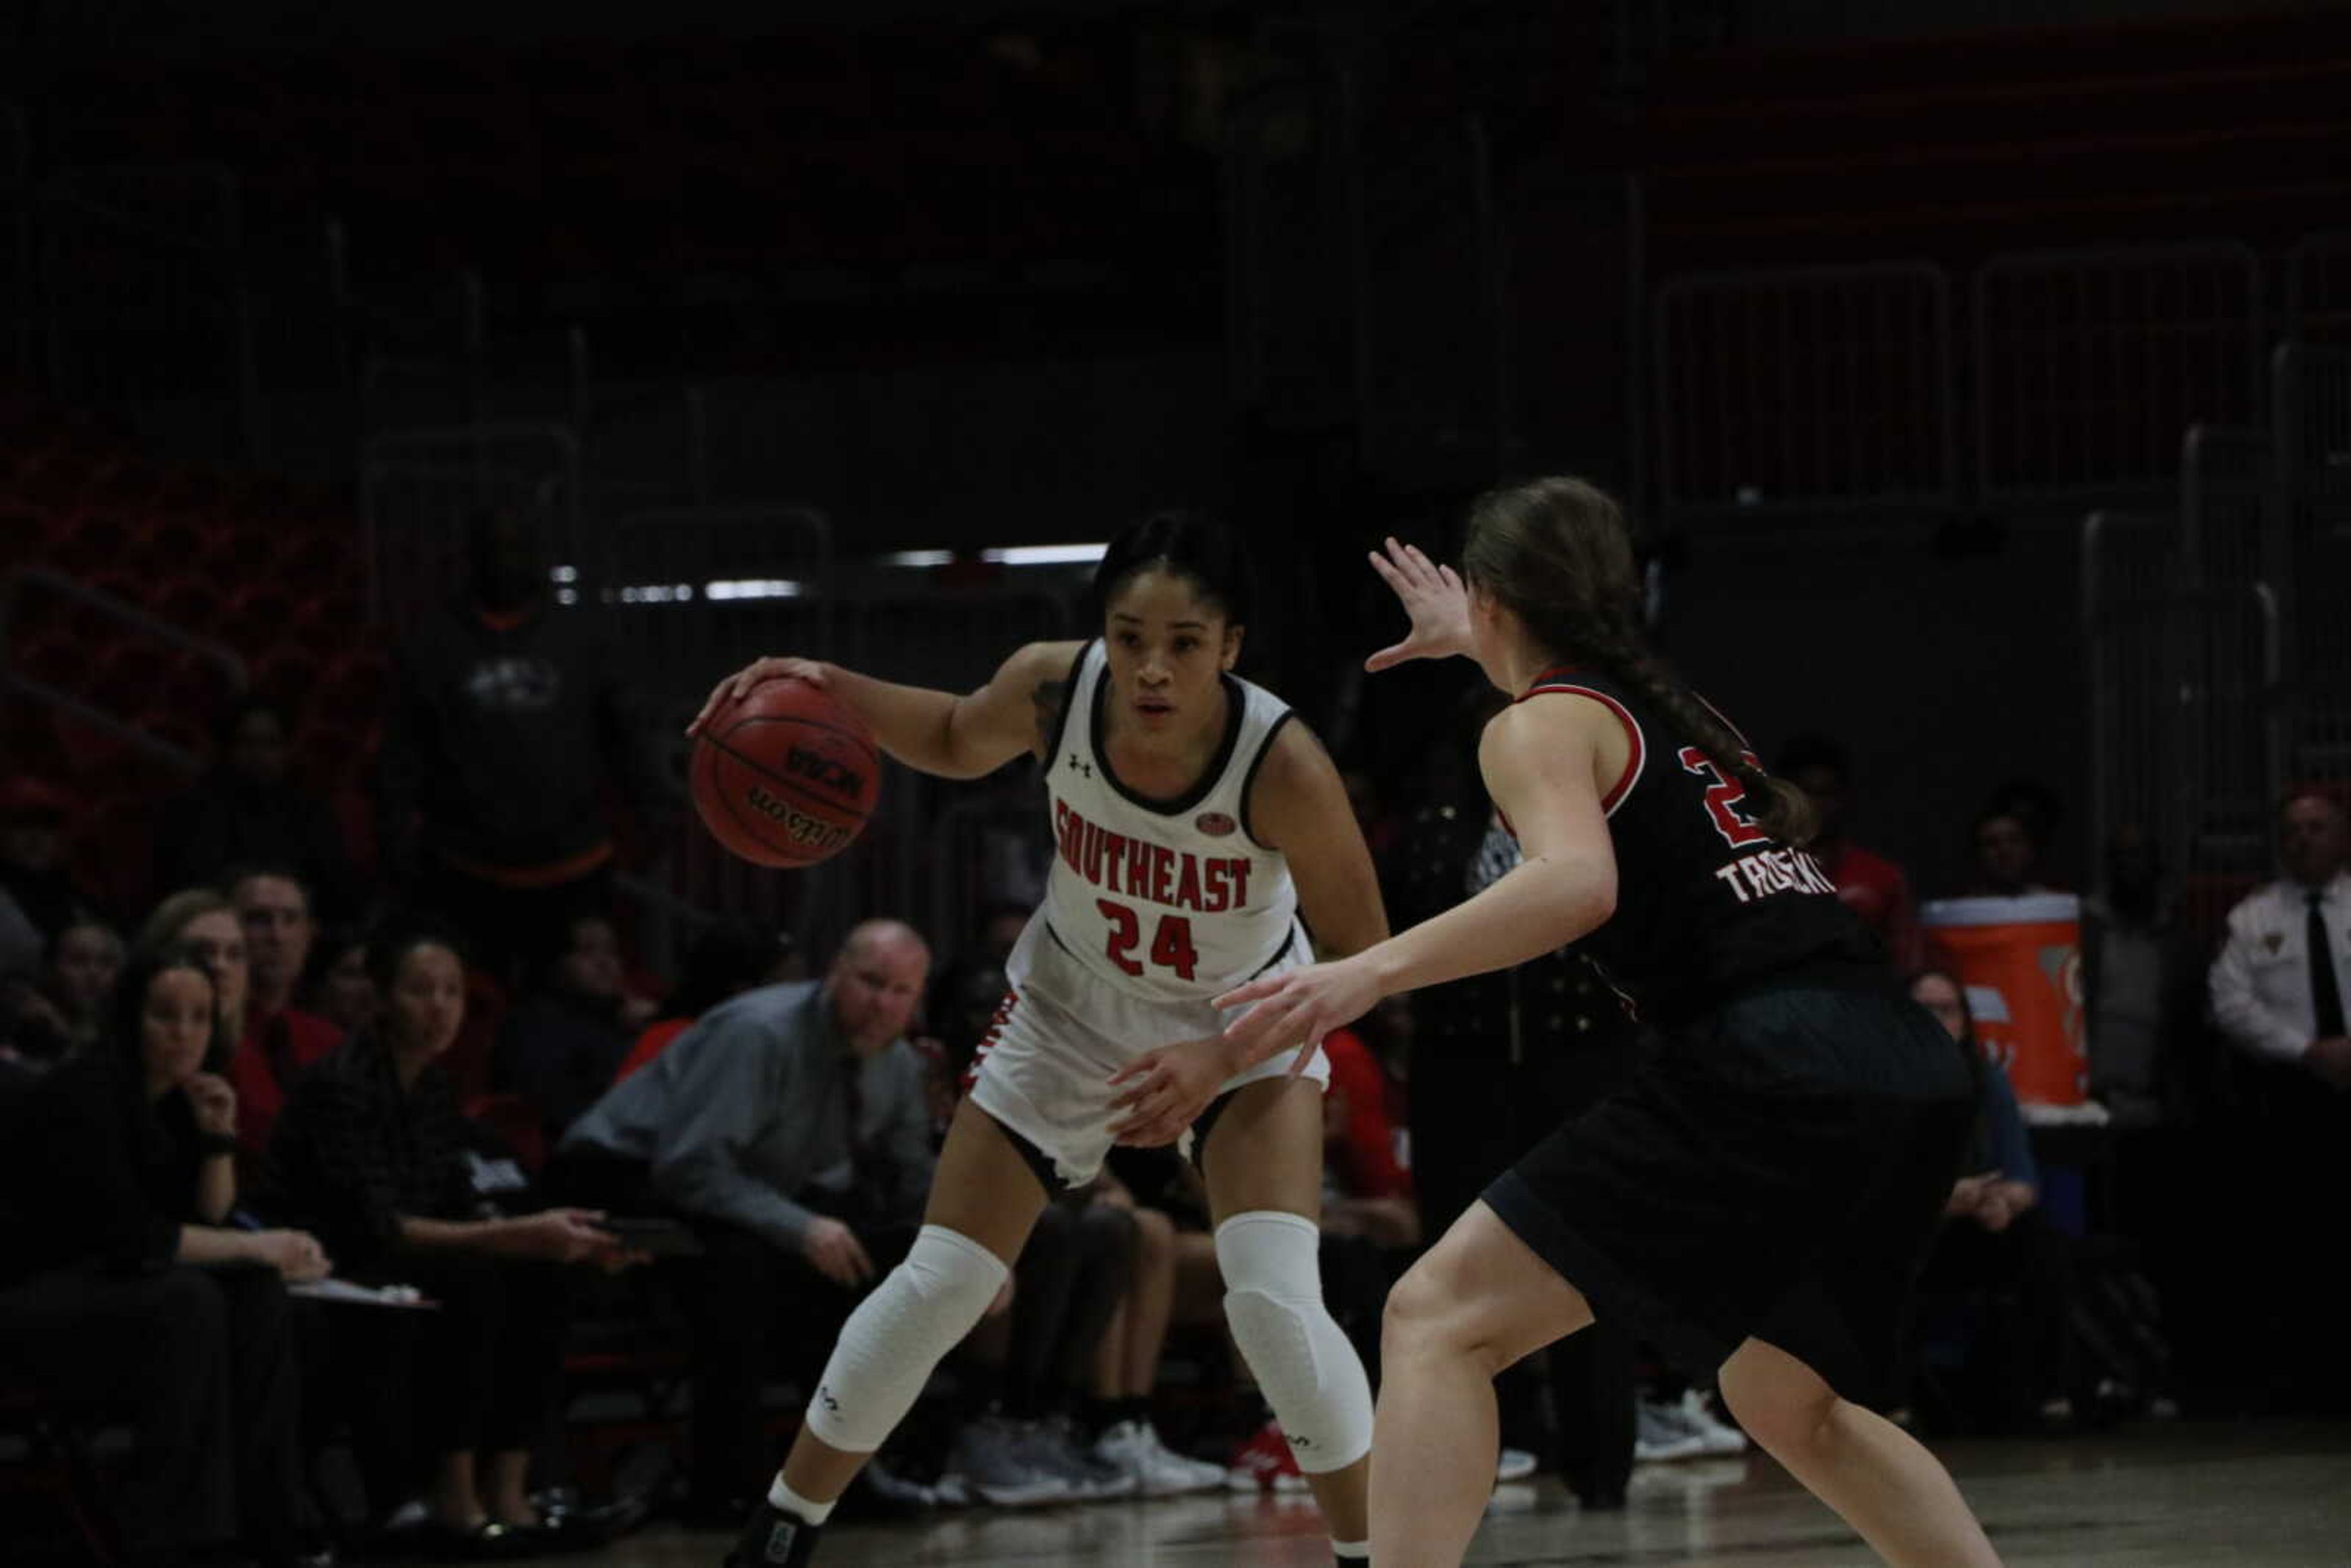 Sophomore guard Tesia Thompson dribbles in the half court against SIU-E on Jan. 24 at the Show Me Center.